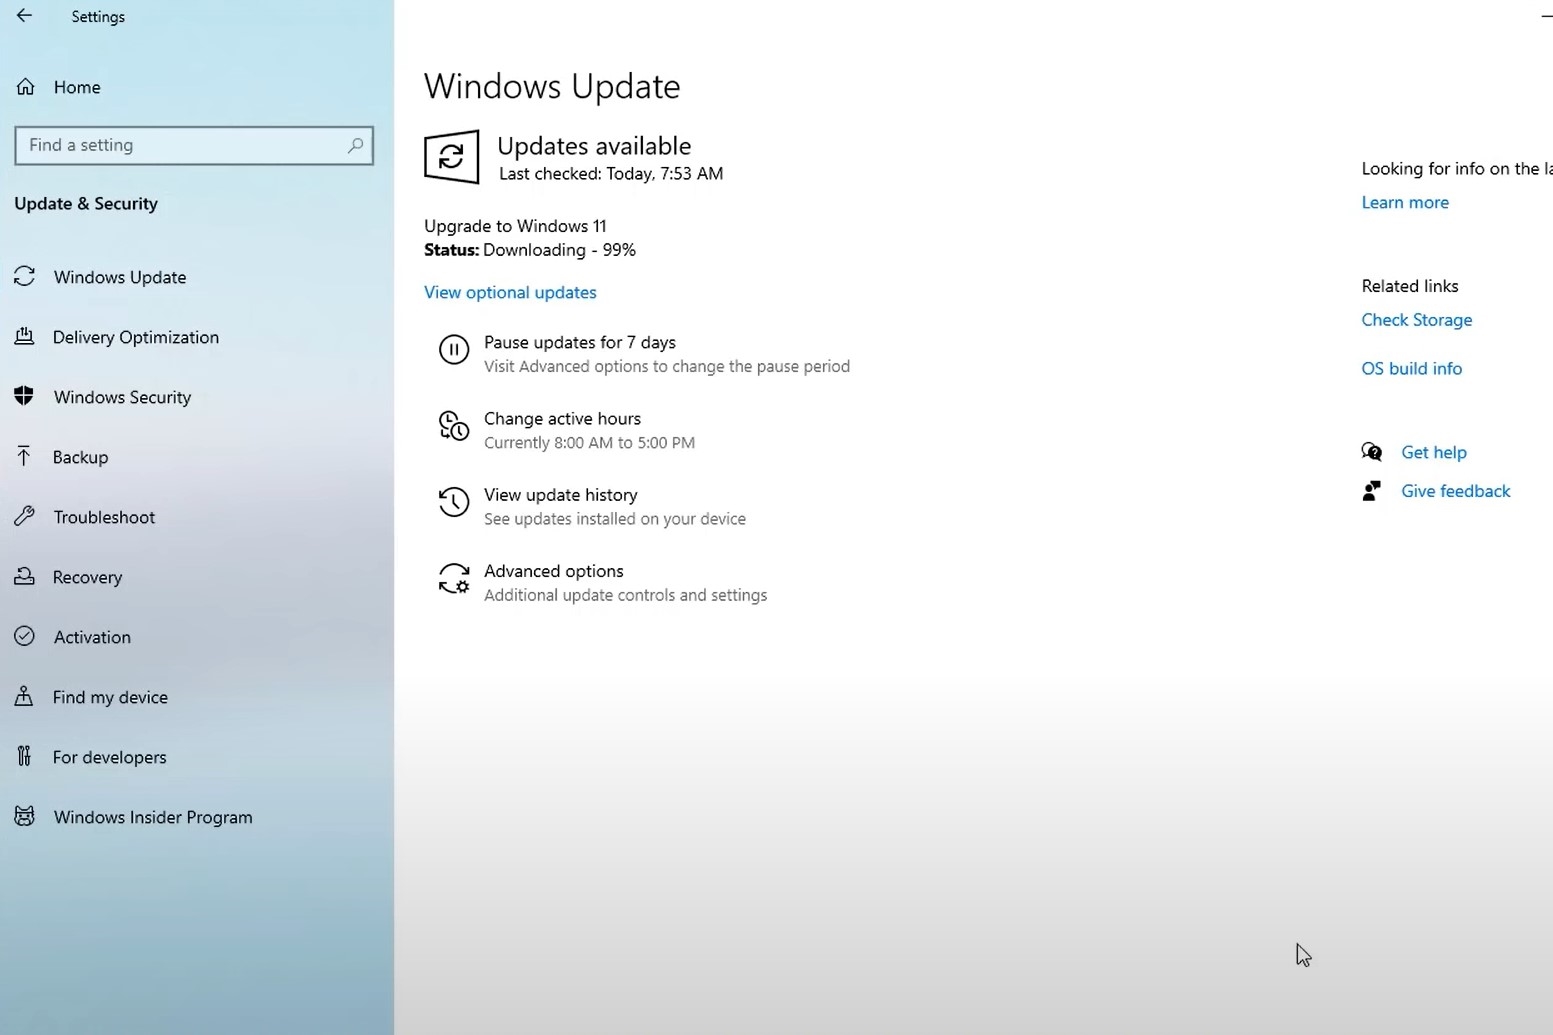 Windows 11 downloading page in Windows update.